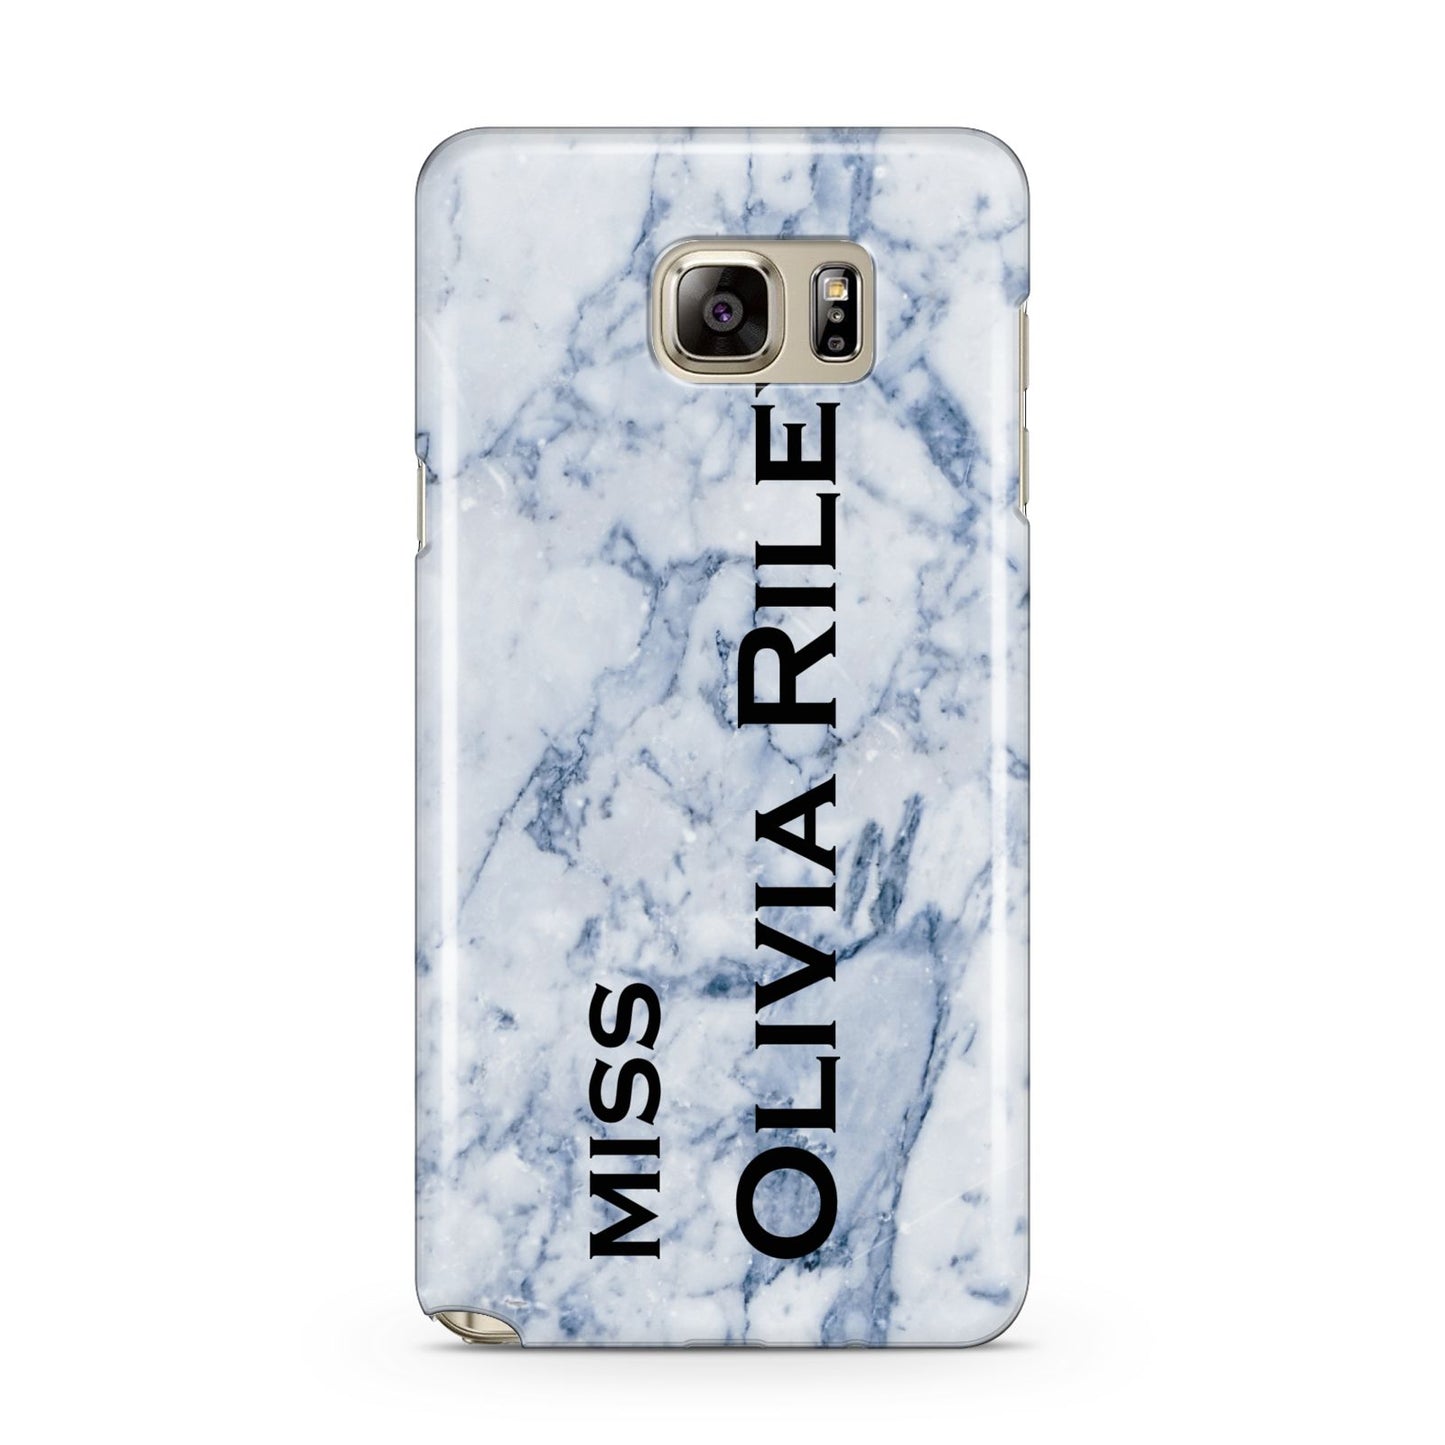 Full Name Grey Marble Samsung Galaxy Note 5 Case